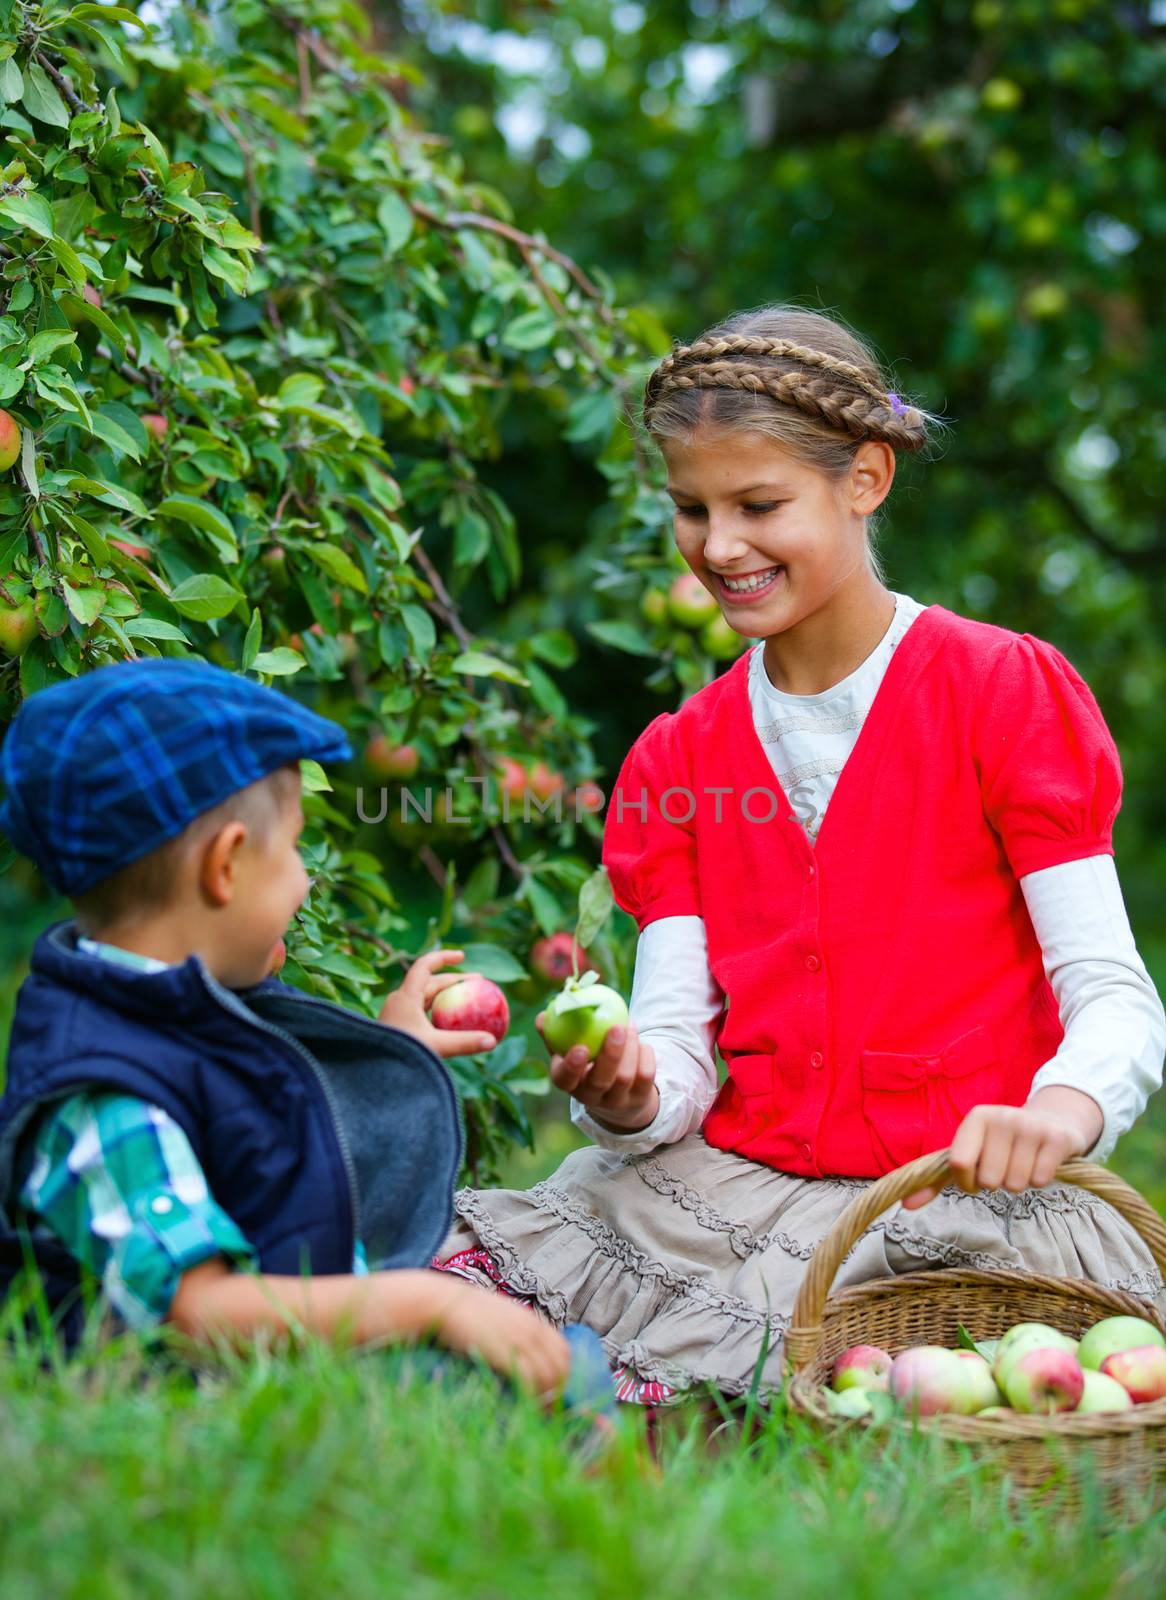 Harvesting apples. Cute girl with brother helping in the garden and picking apples in the basket.